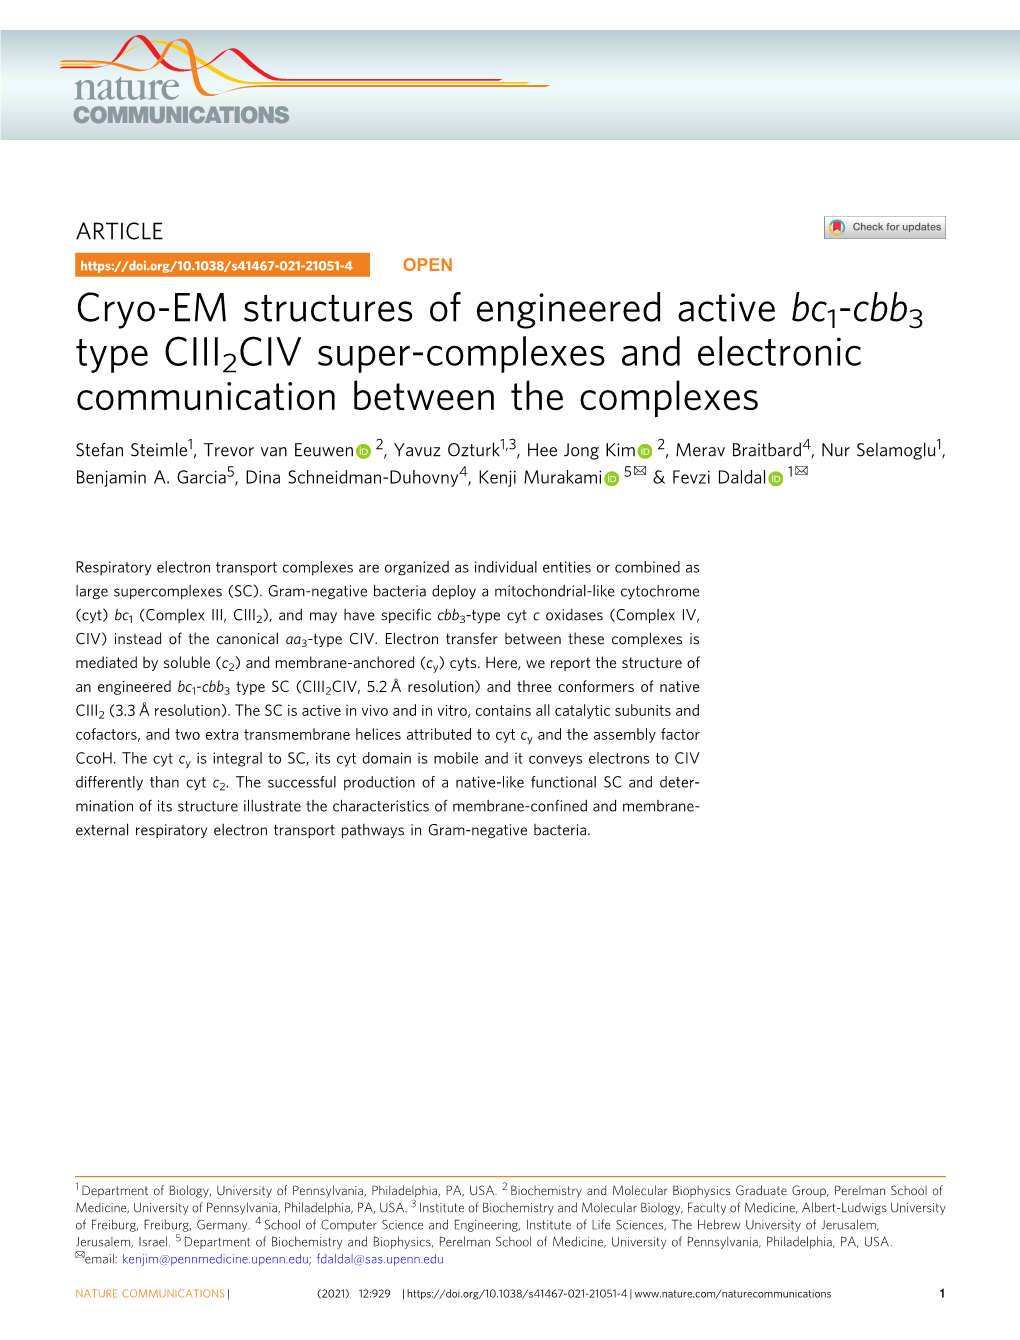 Cryo-EM Structures of Engineered Active Bc1-Cbb3 Type CIII2CIV Super-Complexes and Electronic Communication Between the Complexes